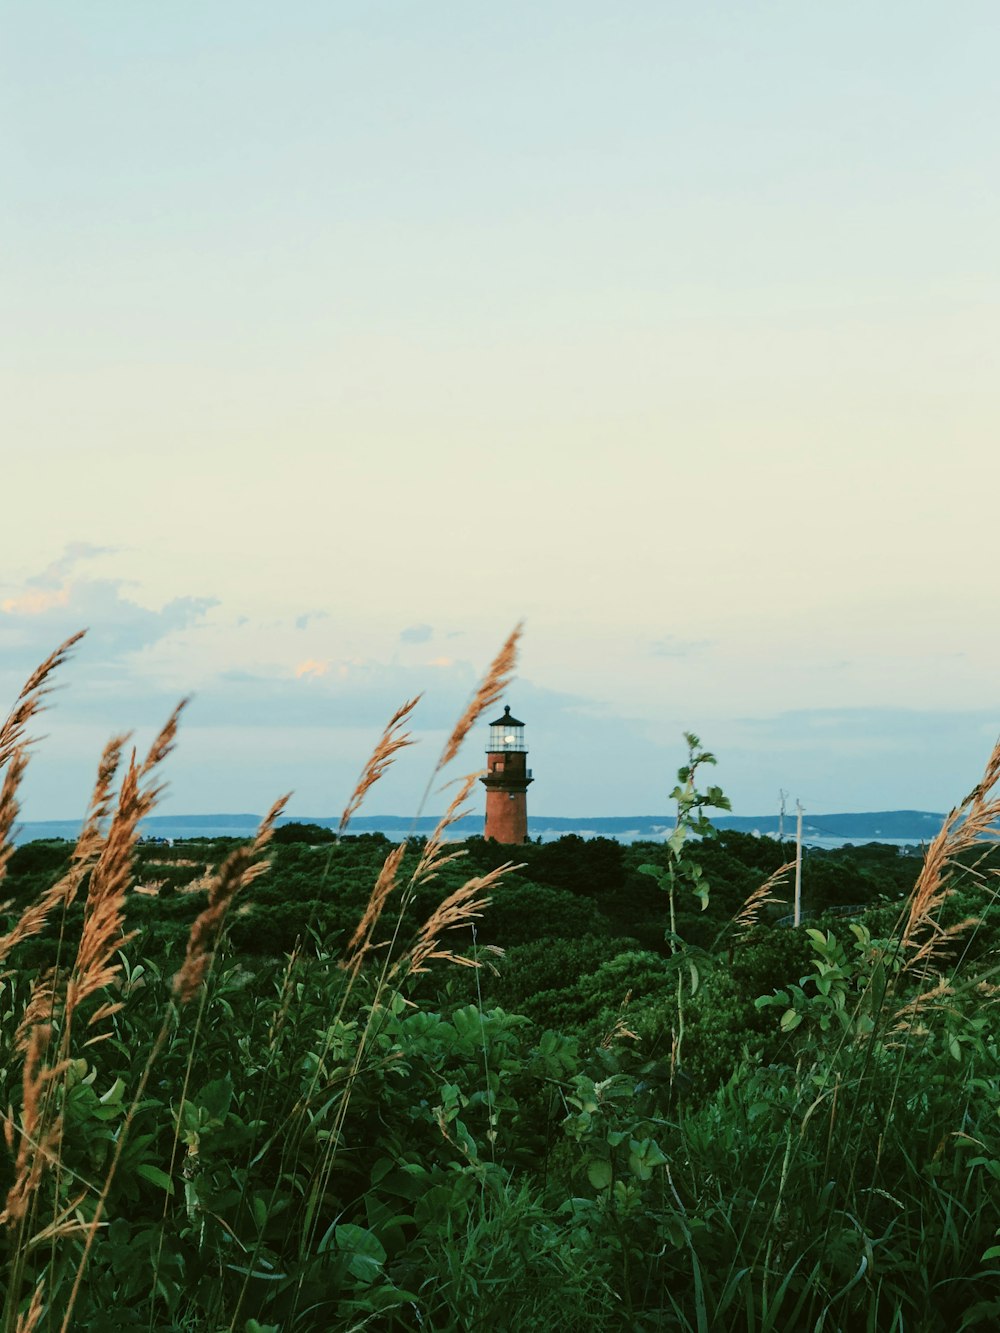 a light house in the middle of a field of tall grass